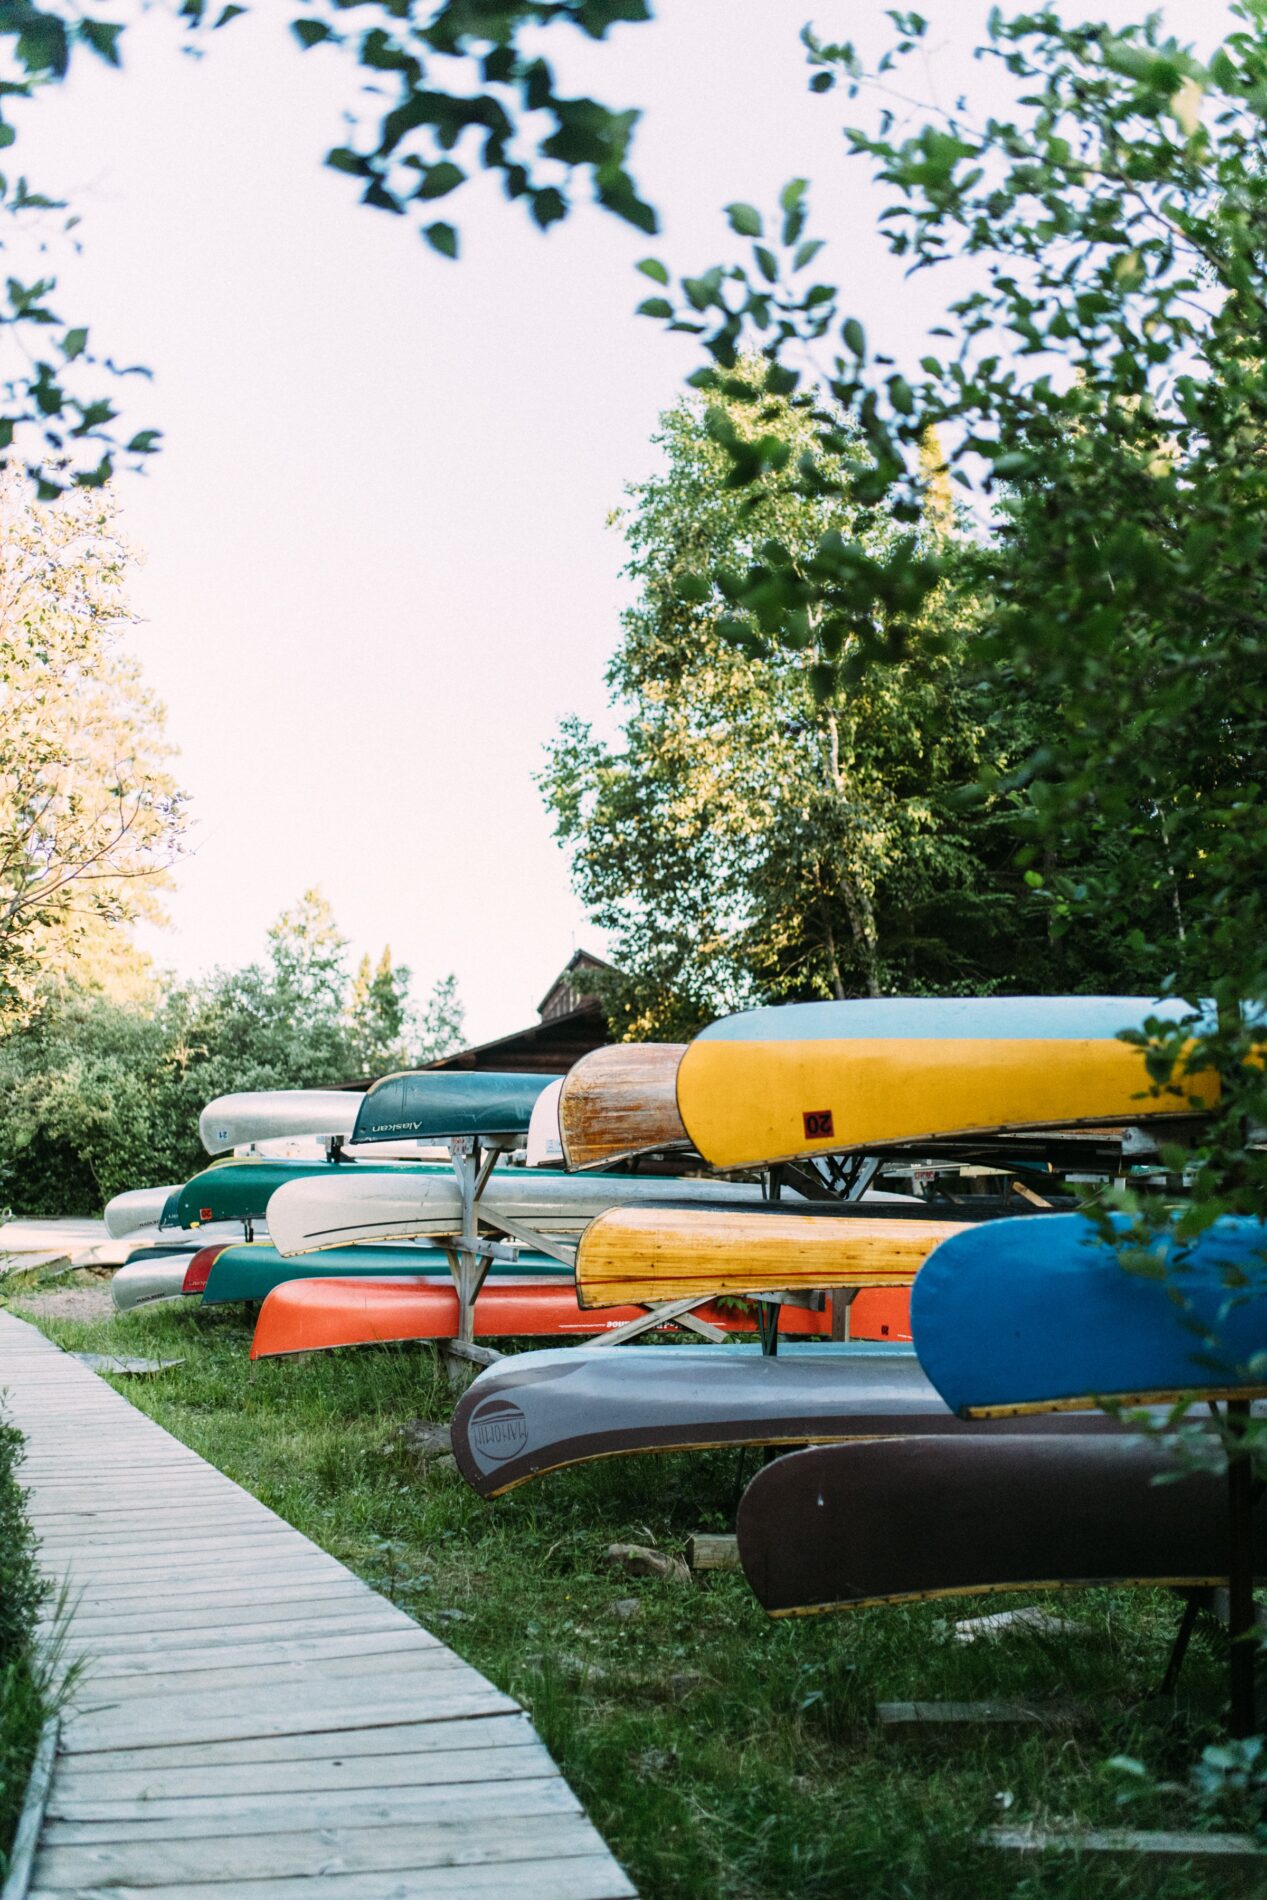 Canoes next to the lake